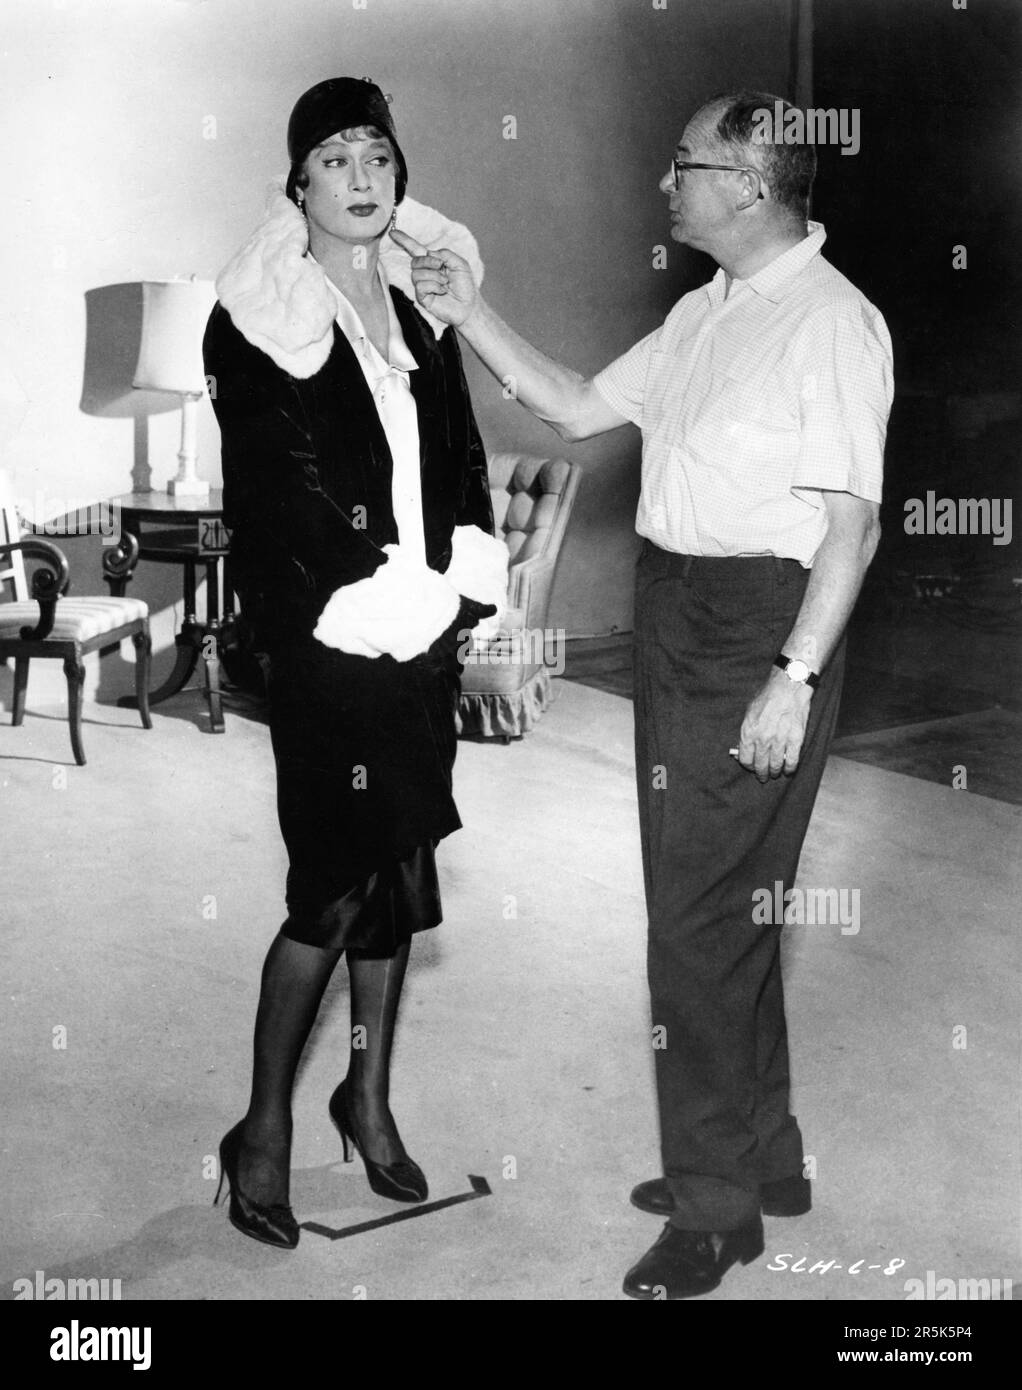 TONY CURTIS has his female costume checked by Director BILLY WILDER on set candid during filming of SOME LIKE IT HOT 1959 director BILLY WILDER screenplay Billy Wilder and I.A.L. Diamond Ashton Productions / The Mirisch Corporation / United Artists Stock Photo